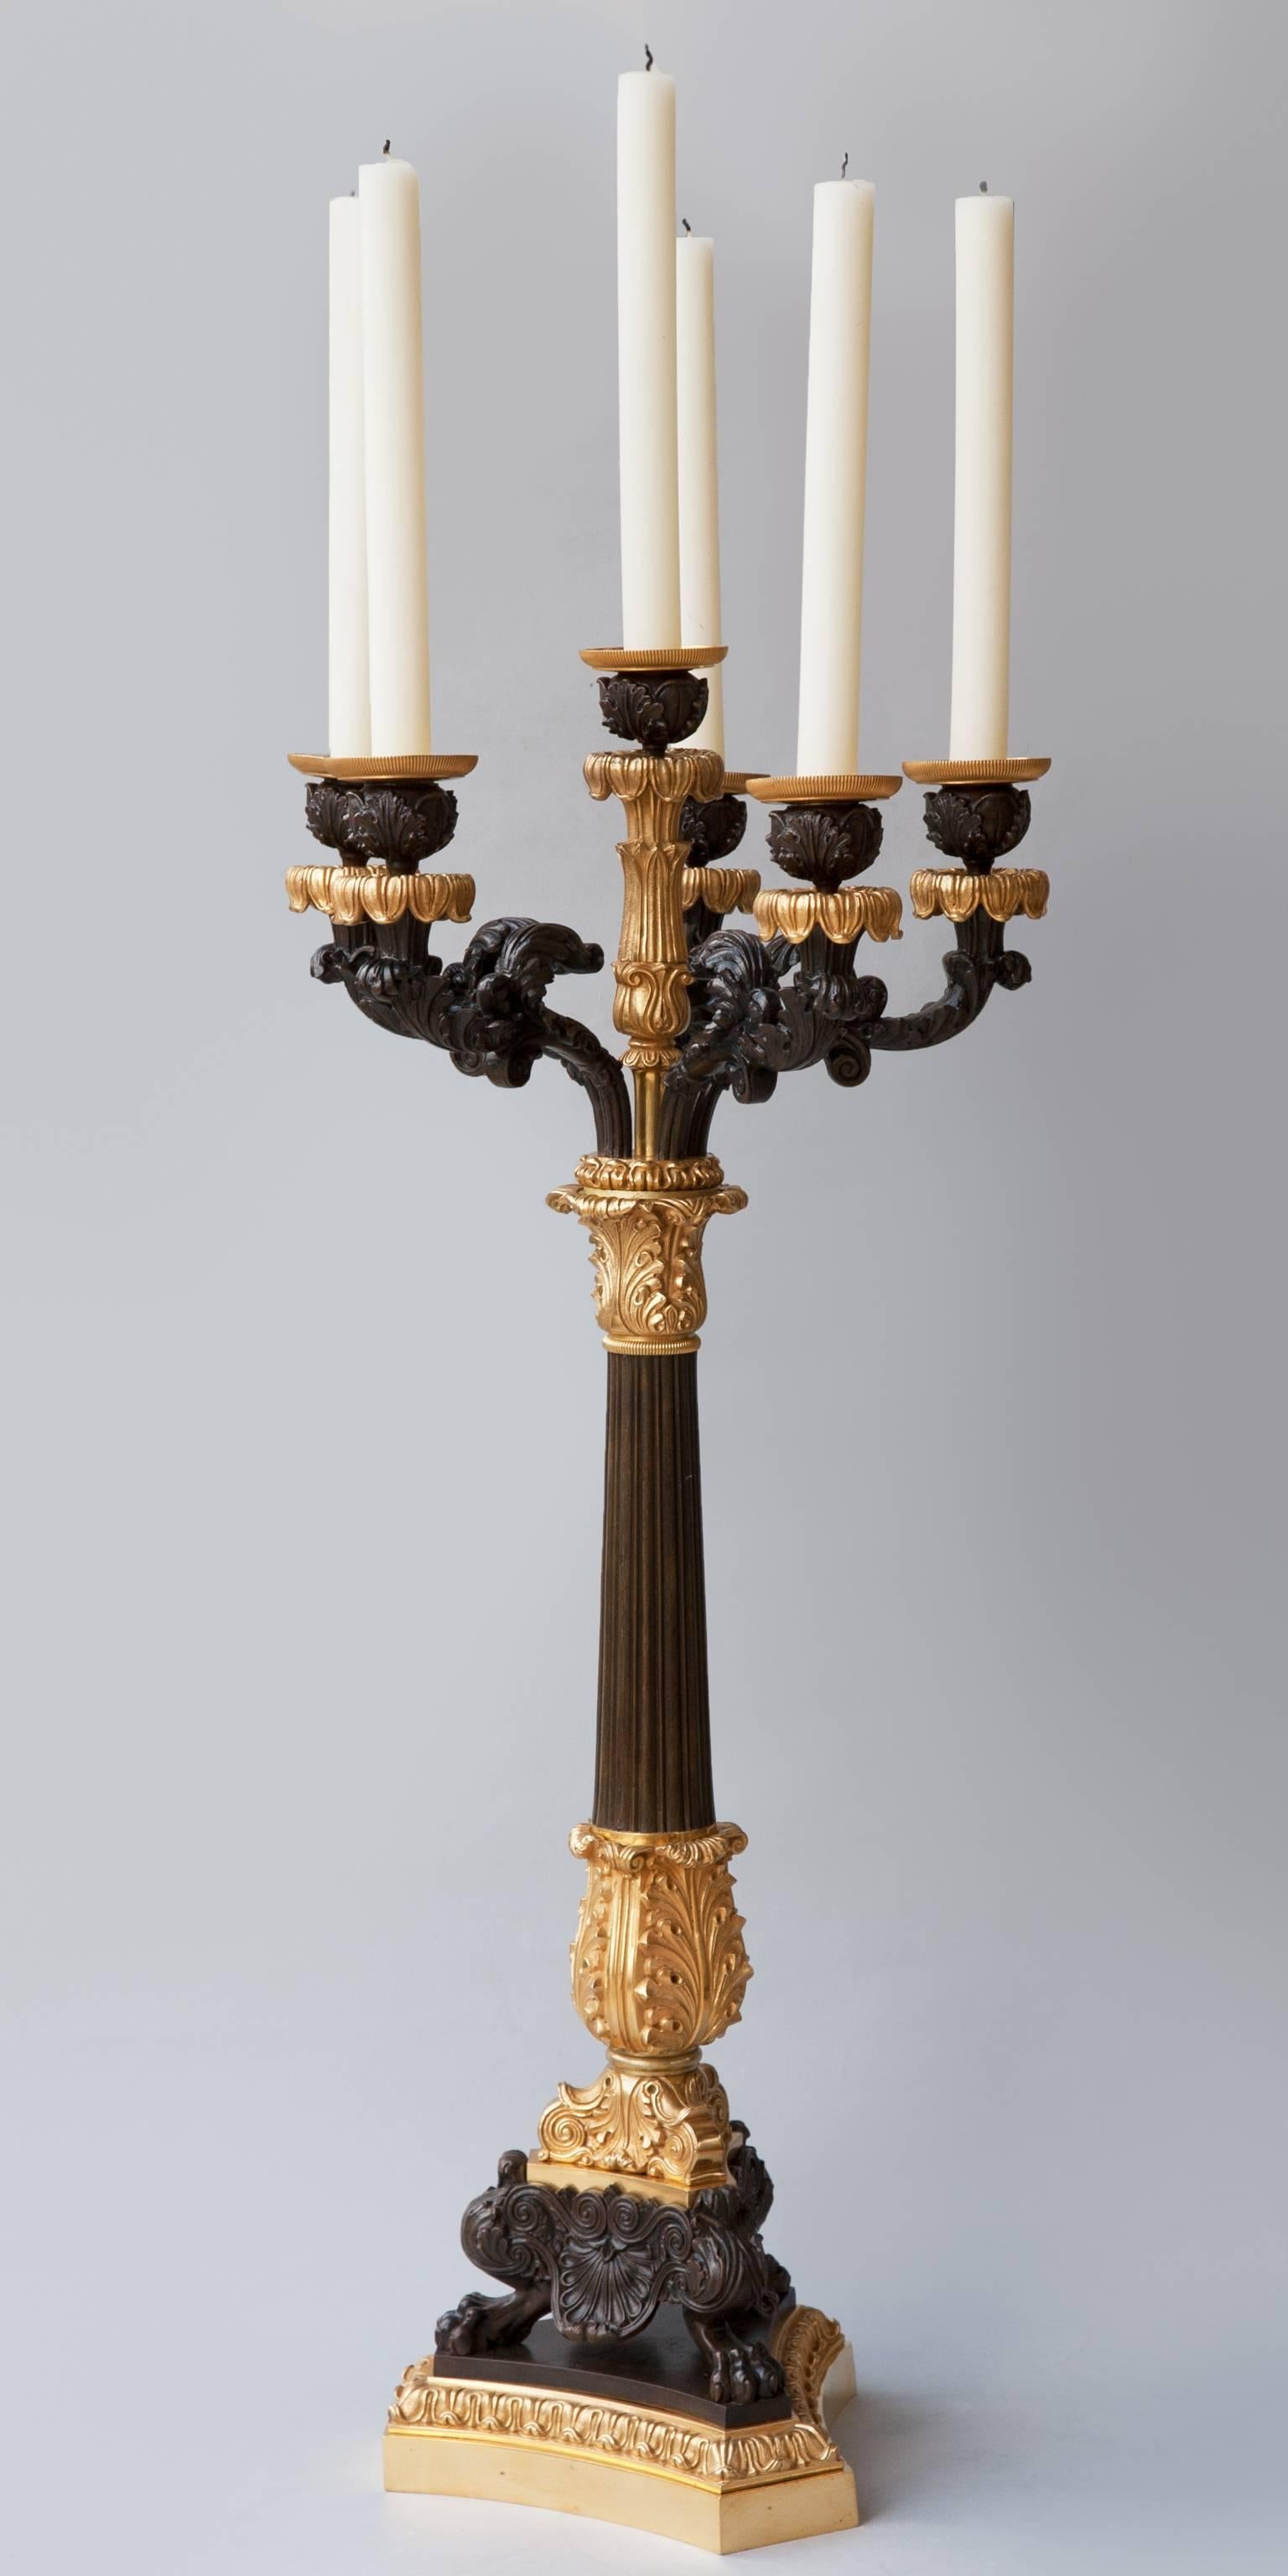 Five arms with gilt bobeche inside a patinated cup, each supported on a patinated arm decorated with acanthus leaves. A raised central sixth arm completes the top section which is detachable. The top slots into the central tapering and fluted